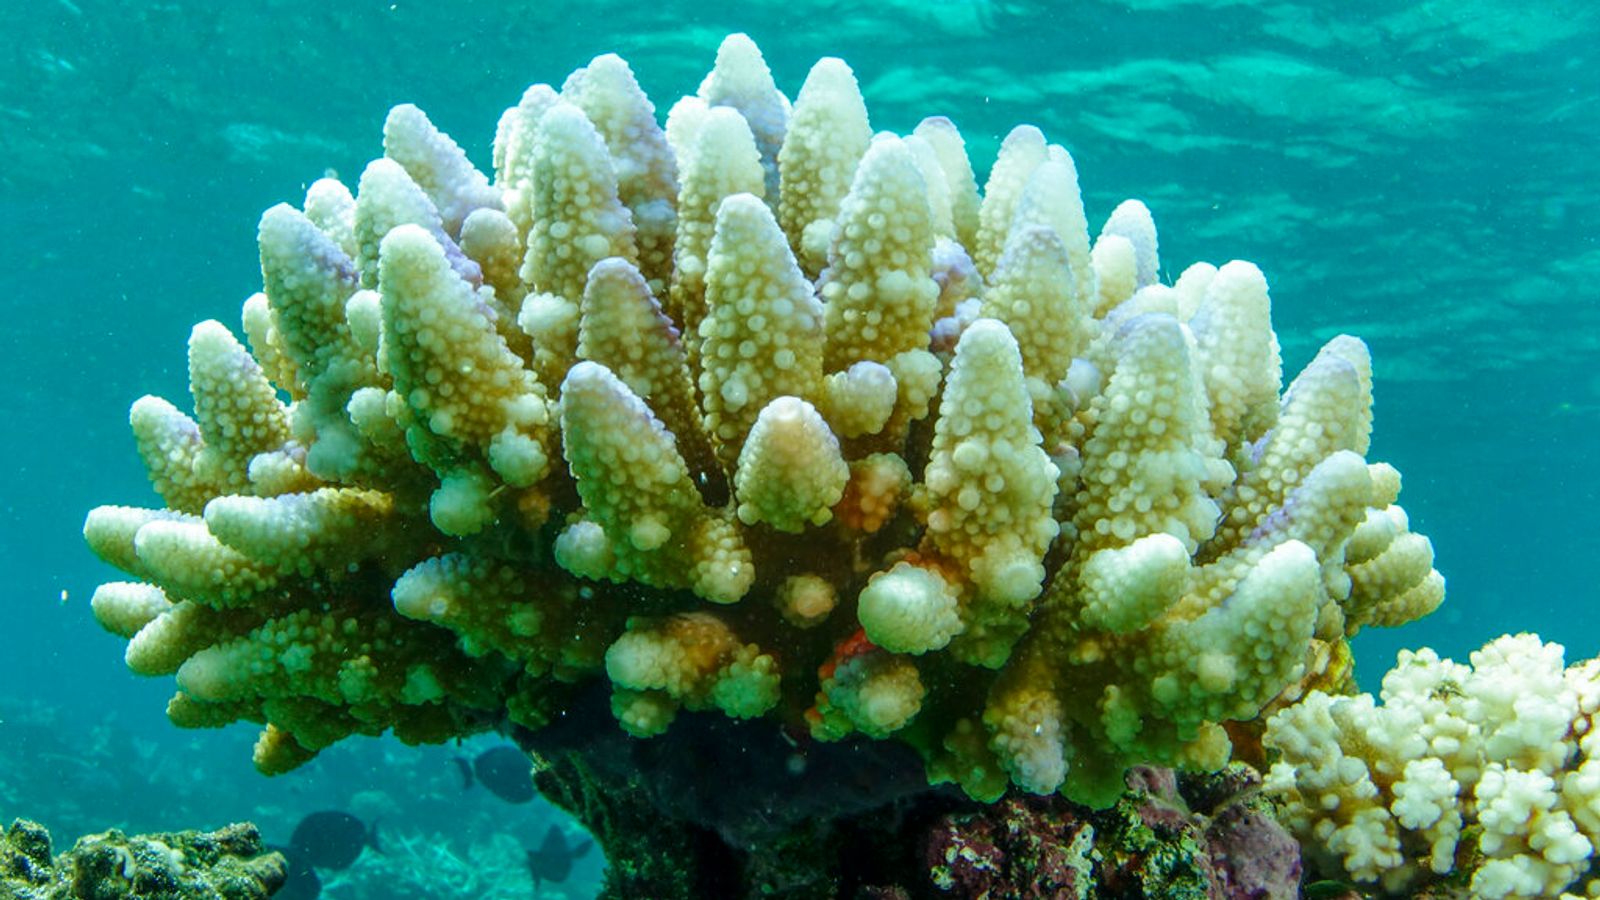 Global Coral Reef Bleaching Event Confirmed Across 53 Countries Due to Climate Change